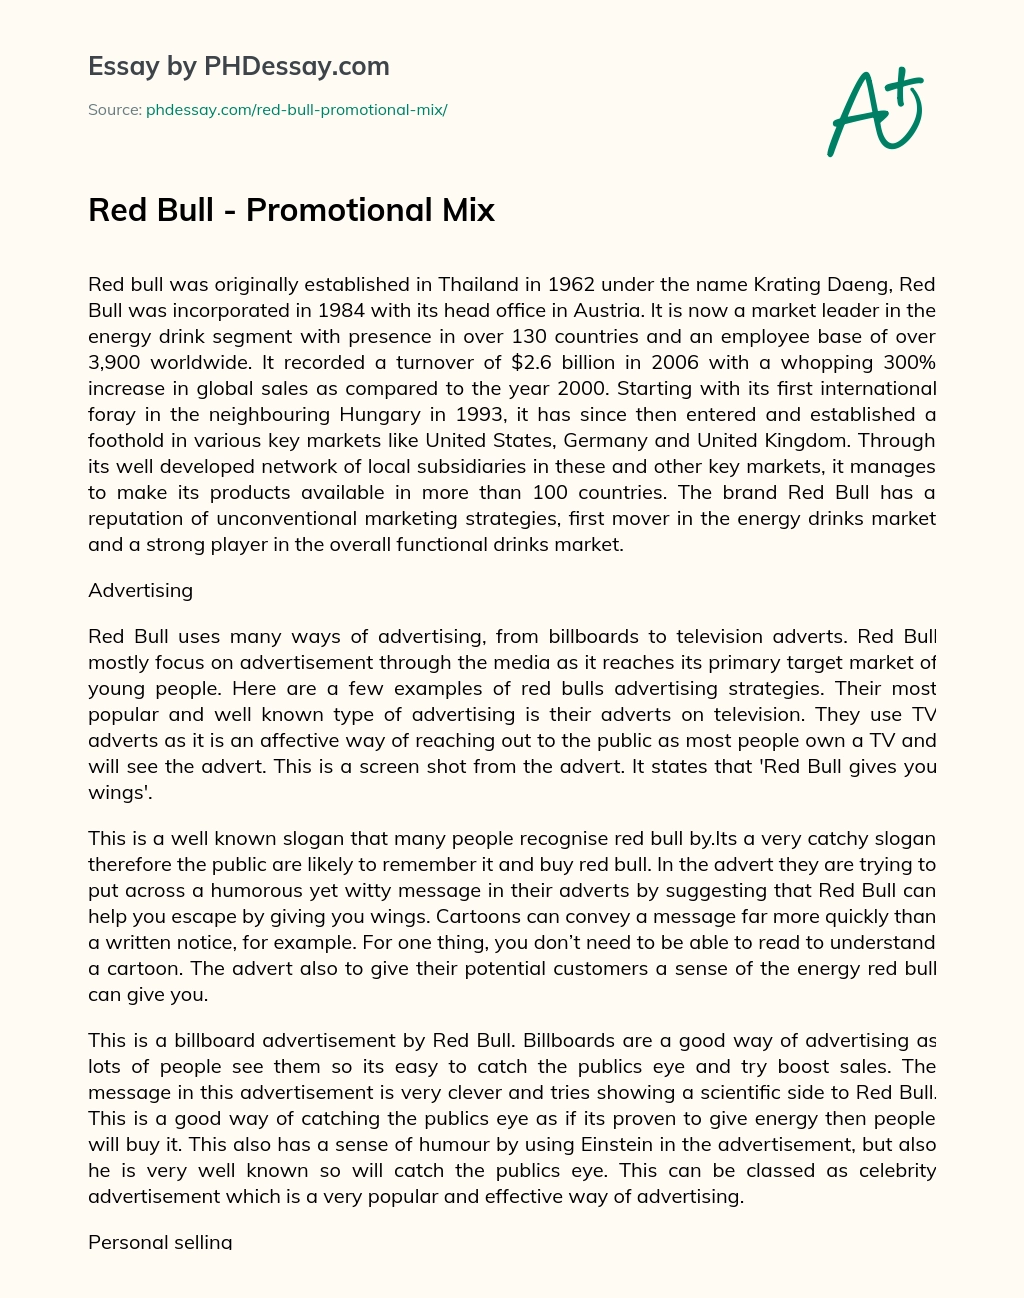 Red Bull – Promotional Mix essay